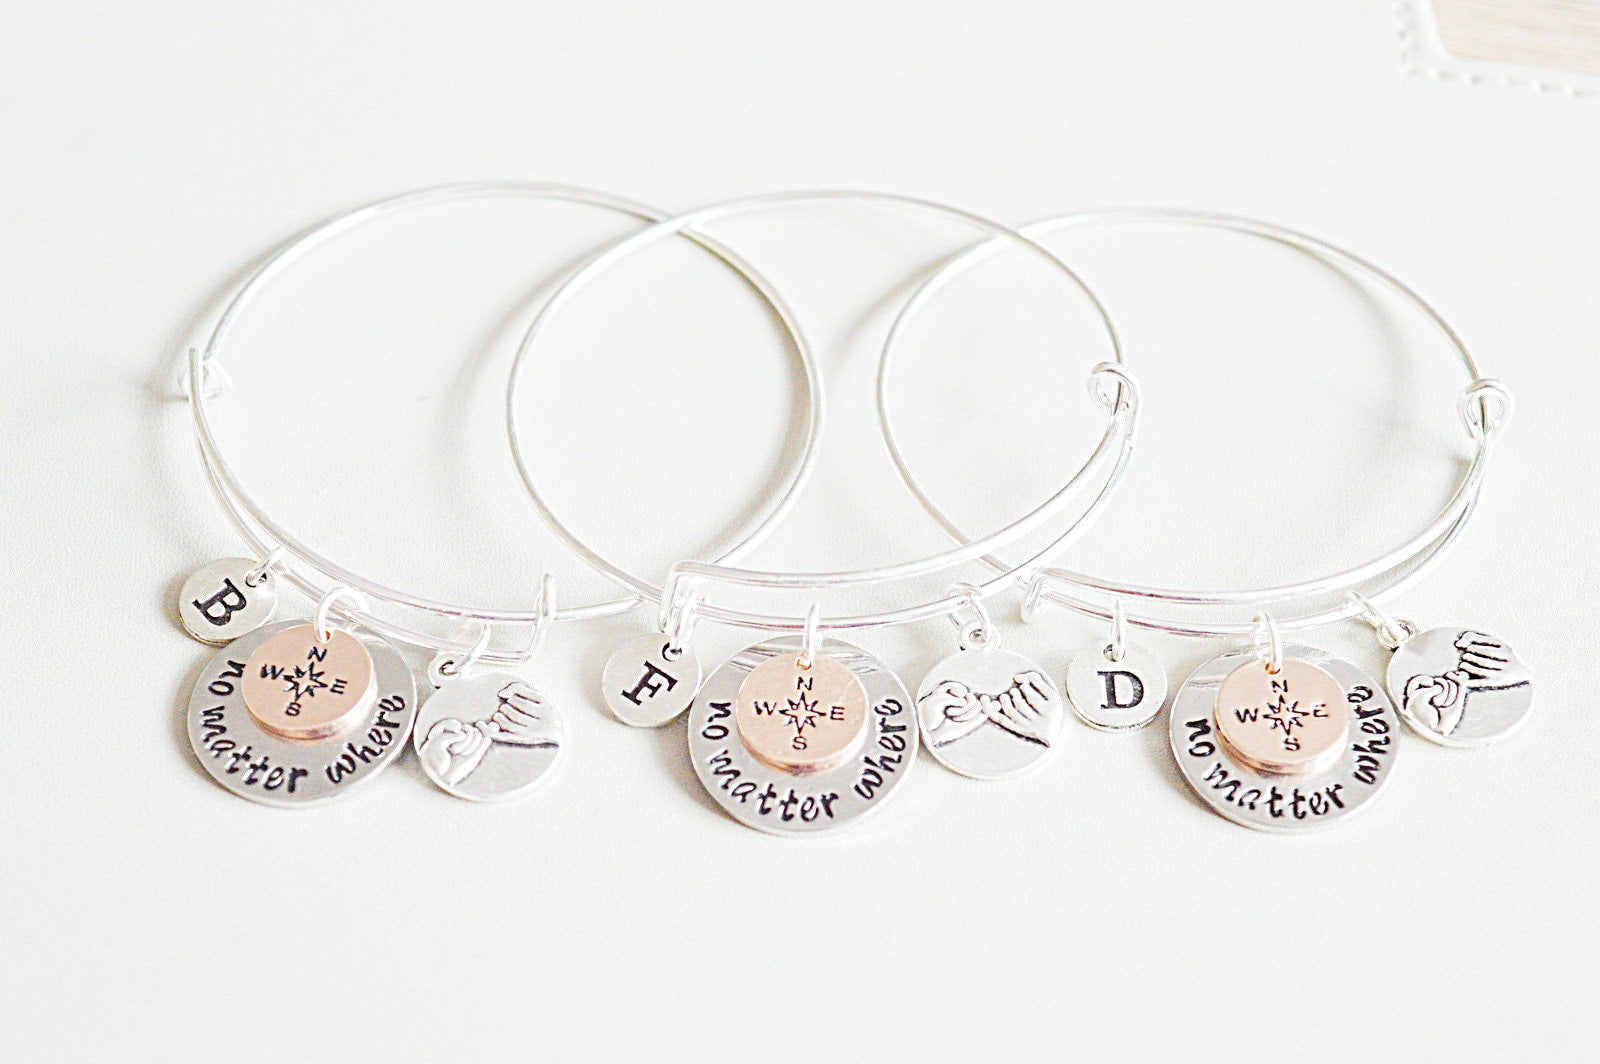 24 Bridesmaid Bracelets That Are Great Wedding Party Gifts